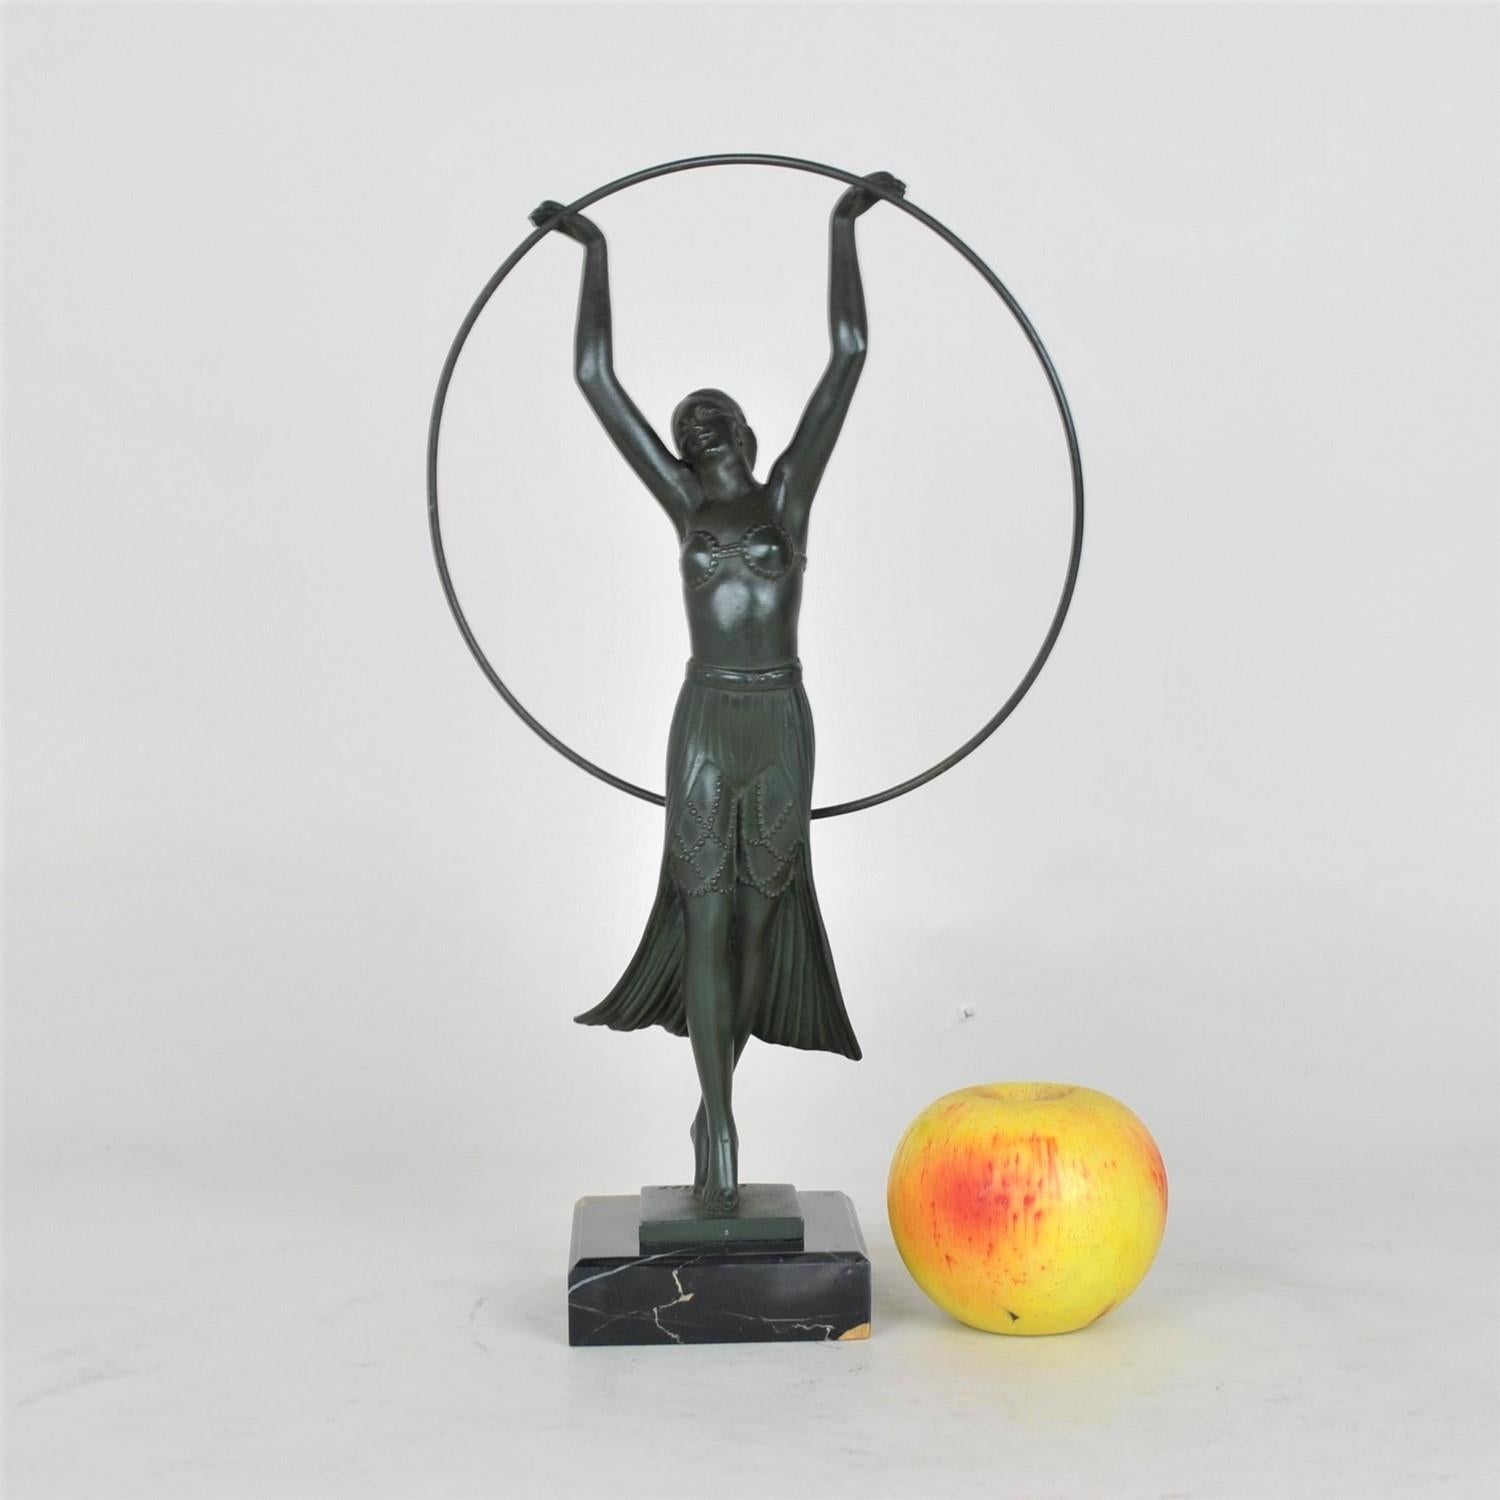 La Bayadère: Sculpture representing a dancer with a hoop, dressed in an exotic costume, and inspired by the ballet character created by Marius Petitpa

Spelter with green patina on a marble base, the counter-base is signed by the artist Charles,